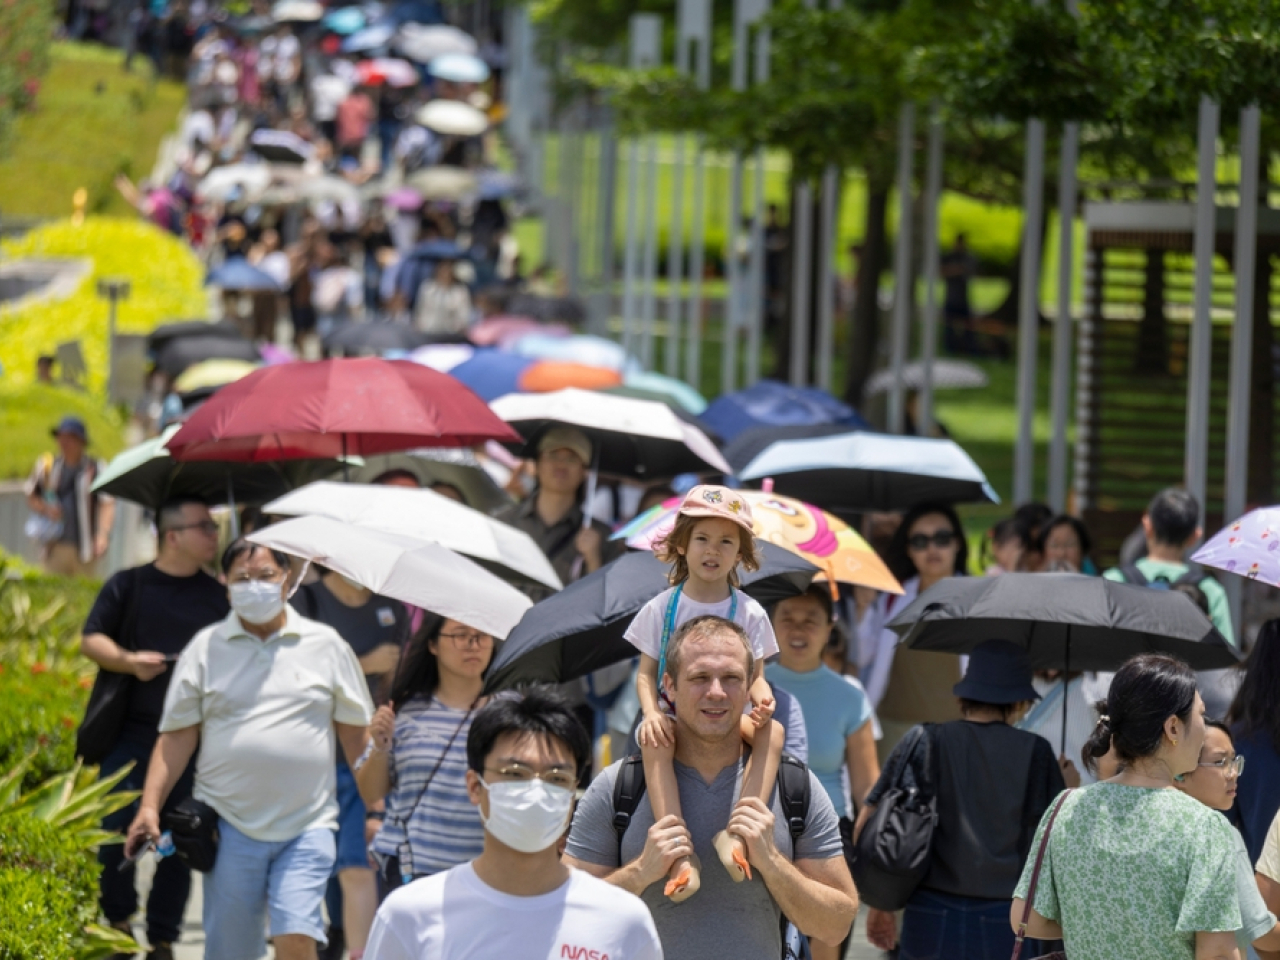 Hong Kong experienced hottest April on record